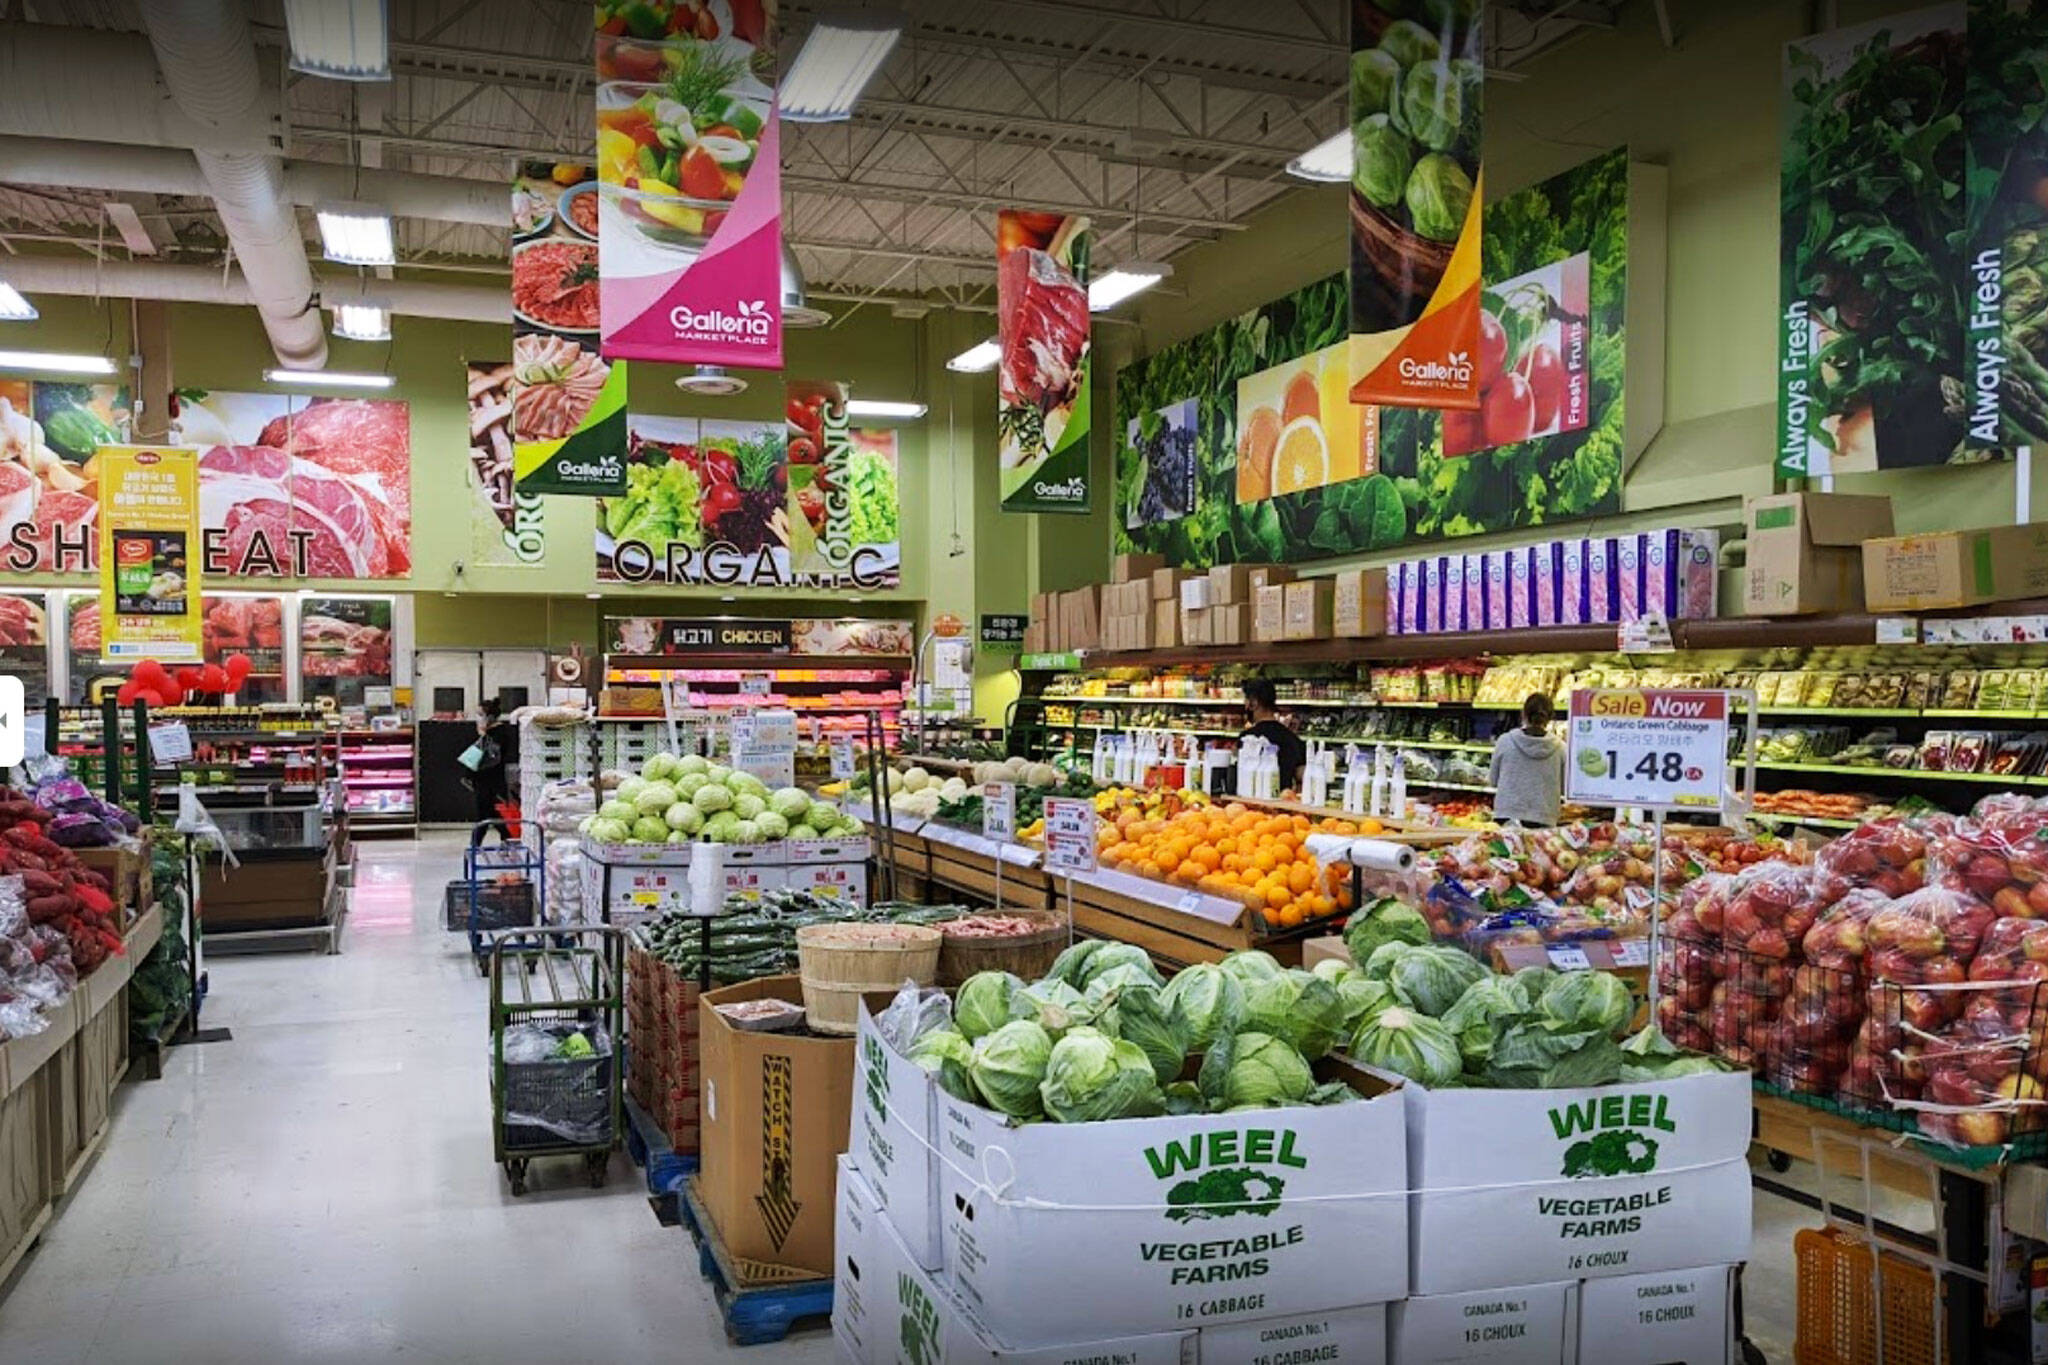 24 Hour Stores Near Me The Best 24 Hour Grocery and Convenience Stores in Toronto